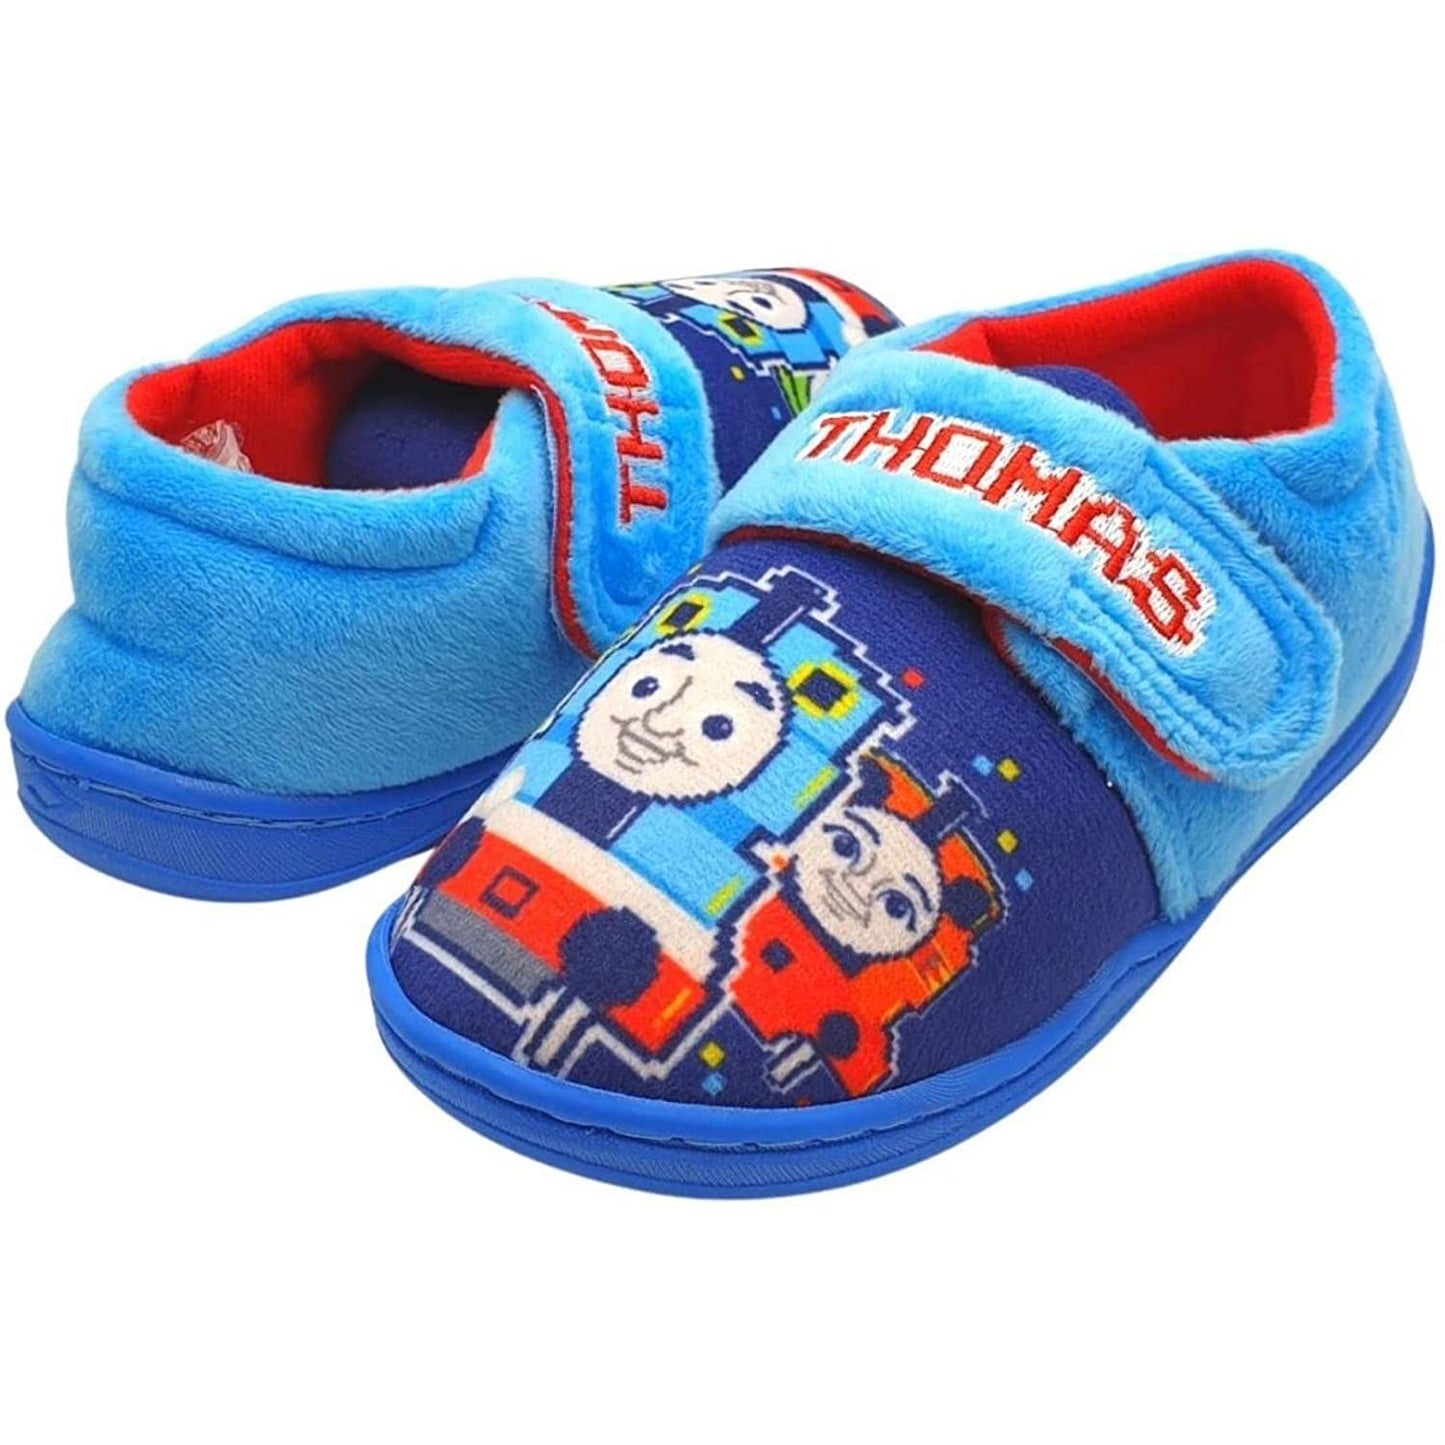 Childs Thomas The Tank Engine and Friends Slippers